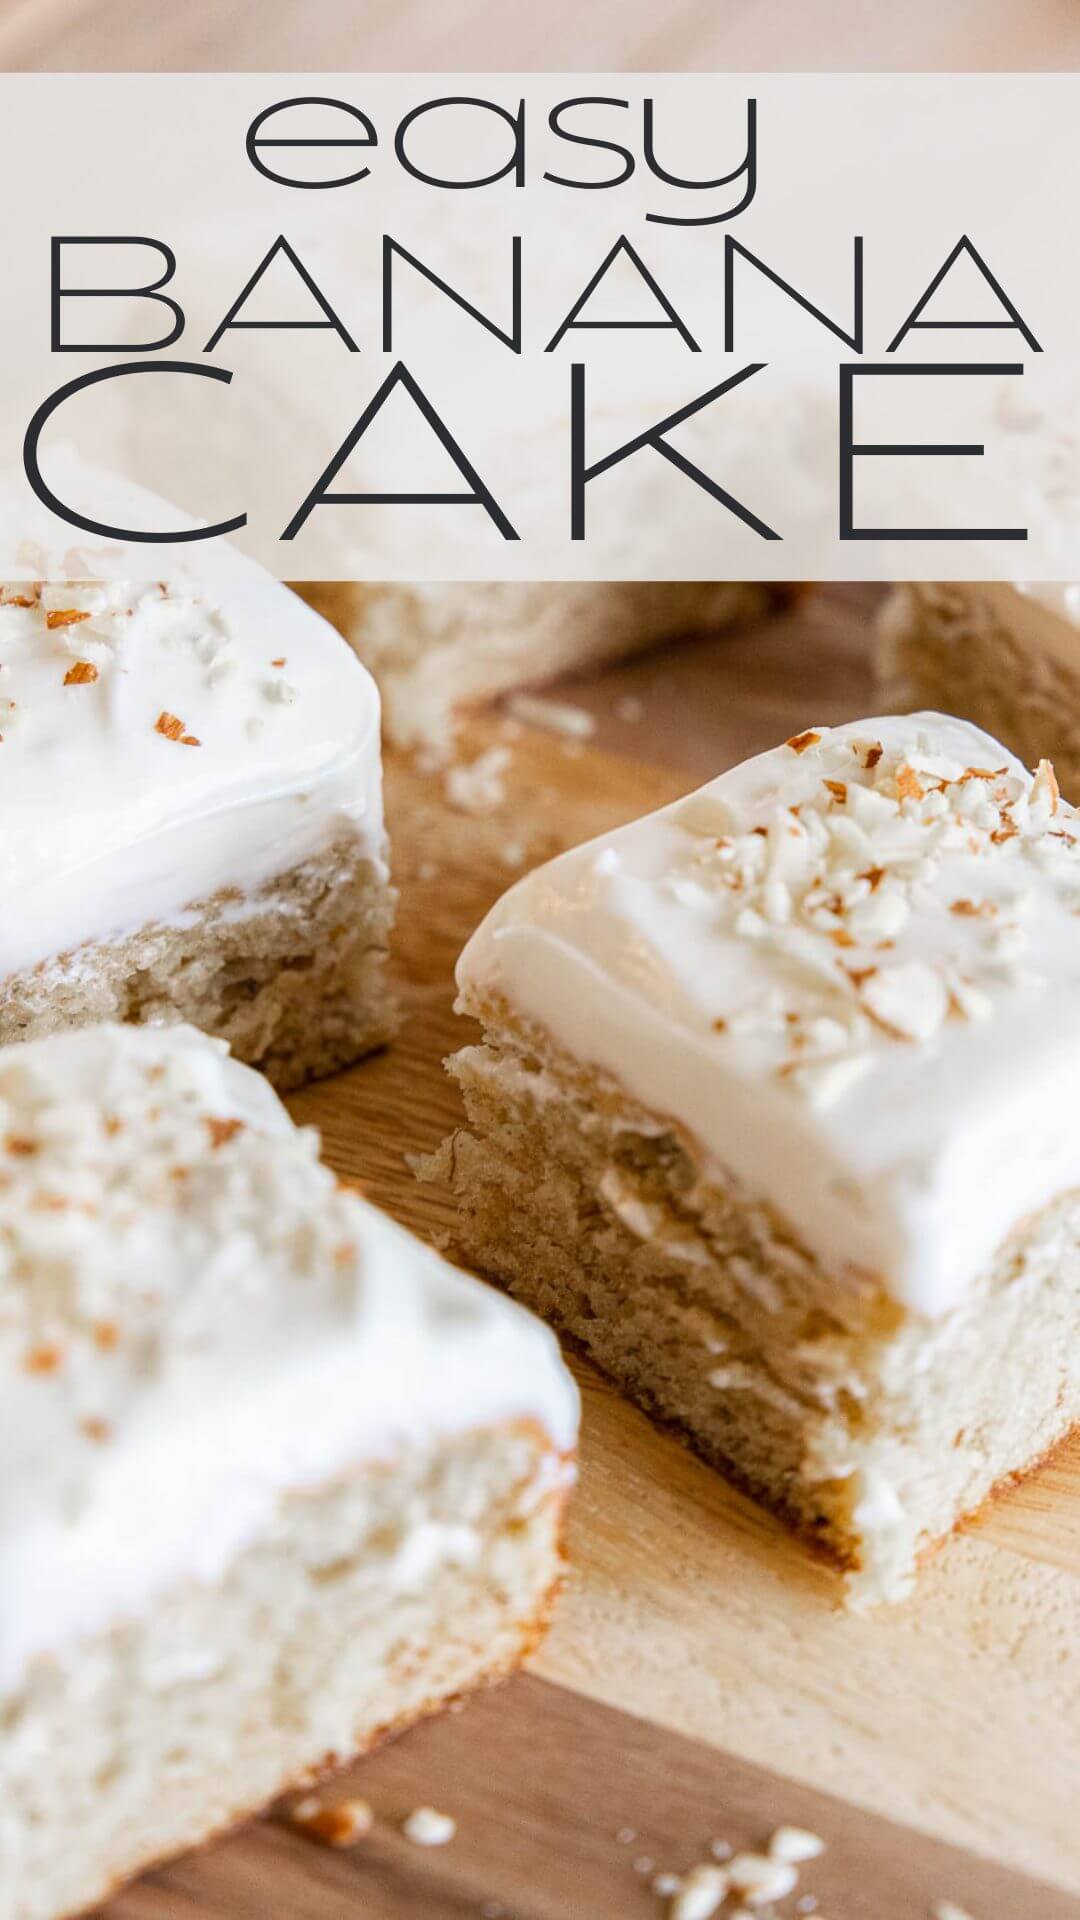 Make the most amazing moist banana cake using overripe bananas. Top it with my favorite cream cheese frosting and enjoy!